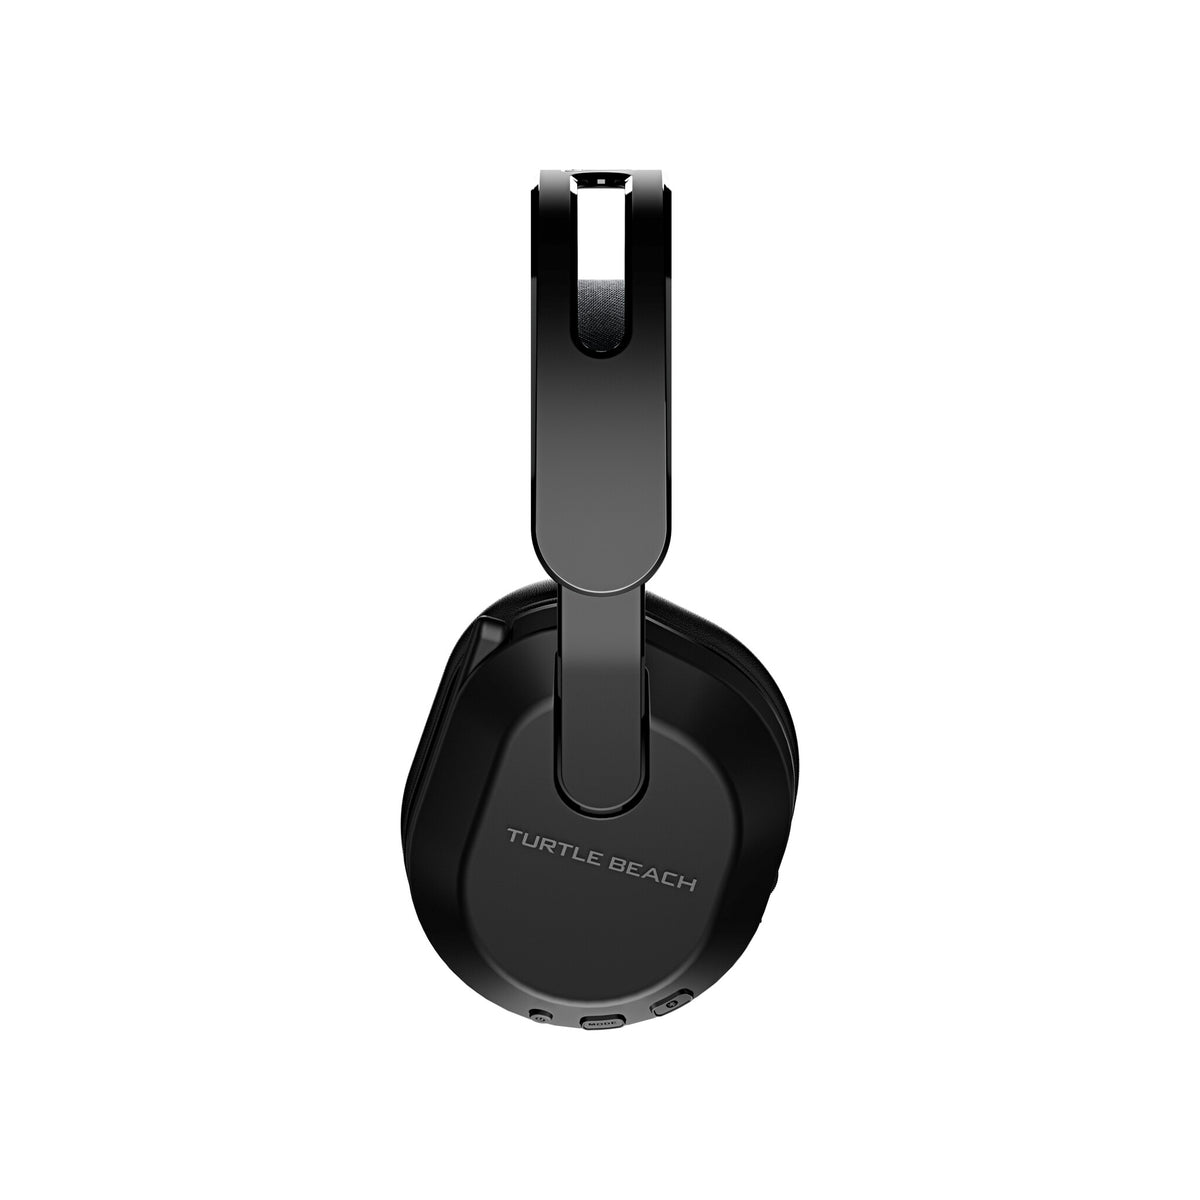 Turtle Beach Stealth 500 - Wireless Bluetooth Gaming Headset for Xbox Series X|S in Black